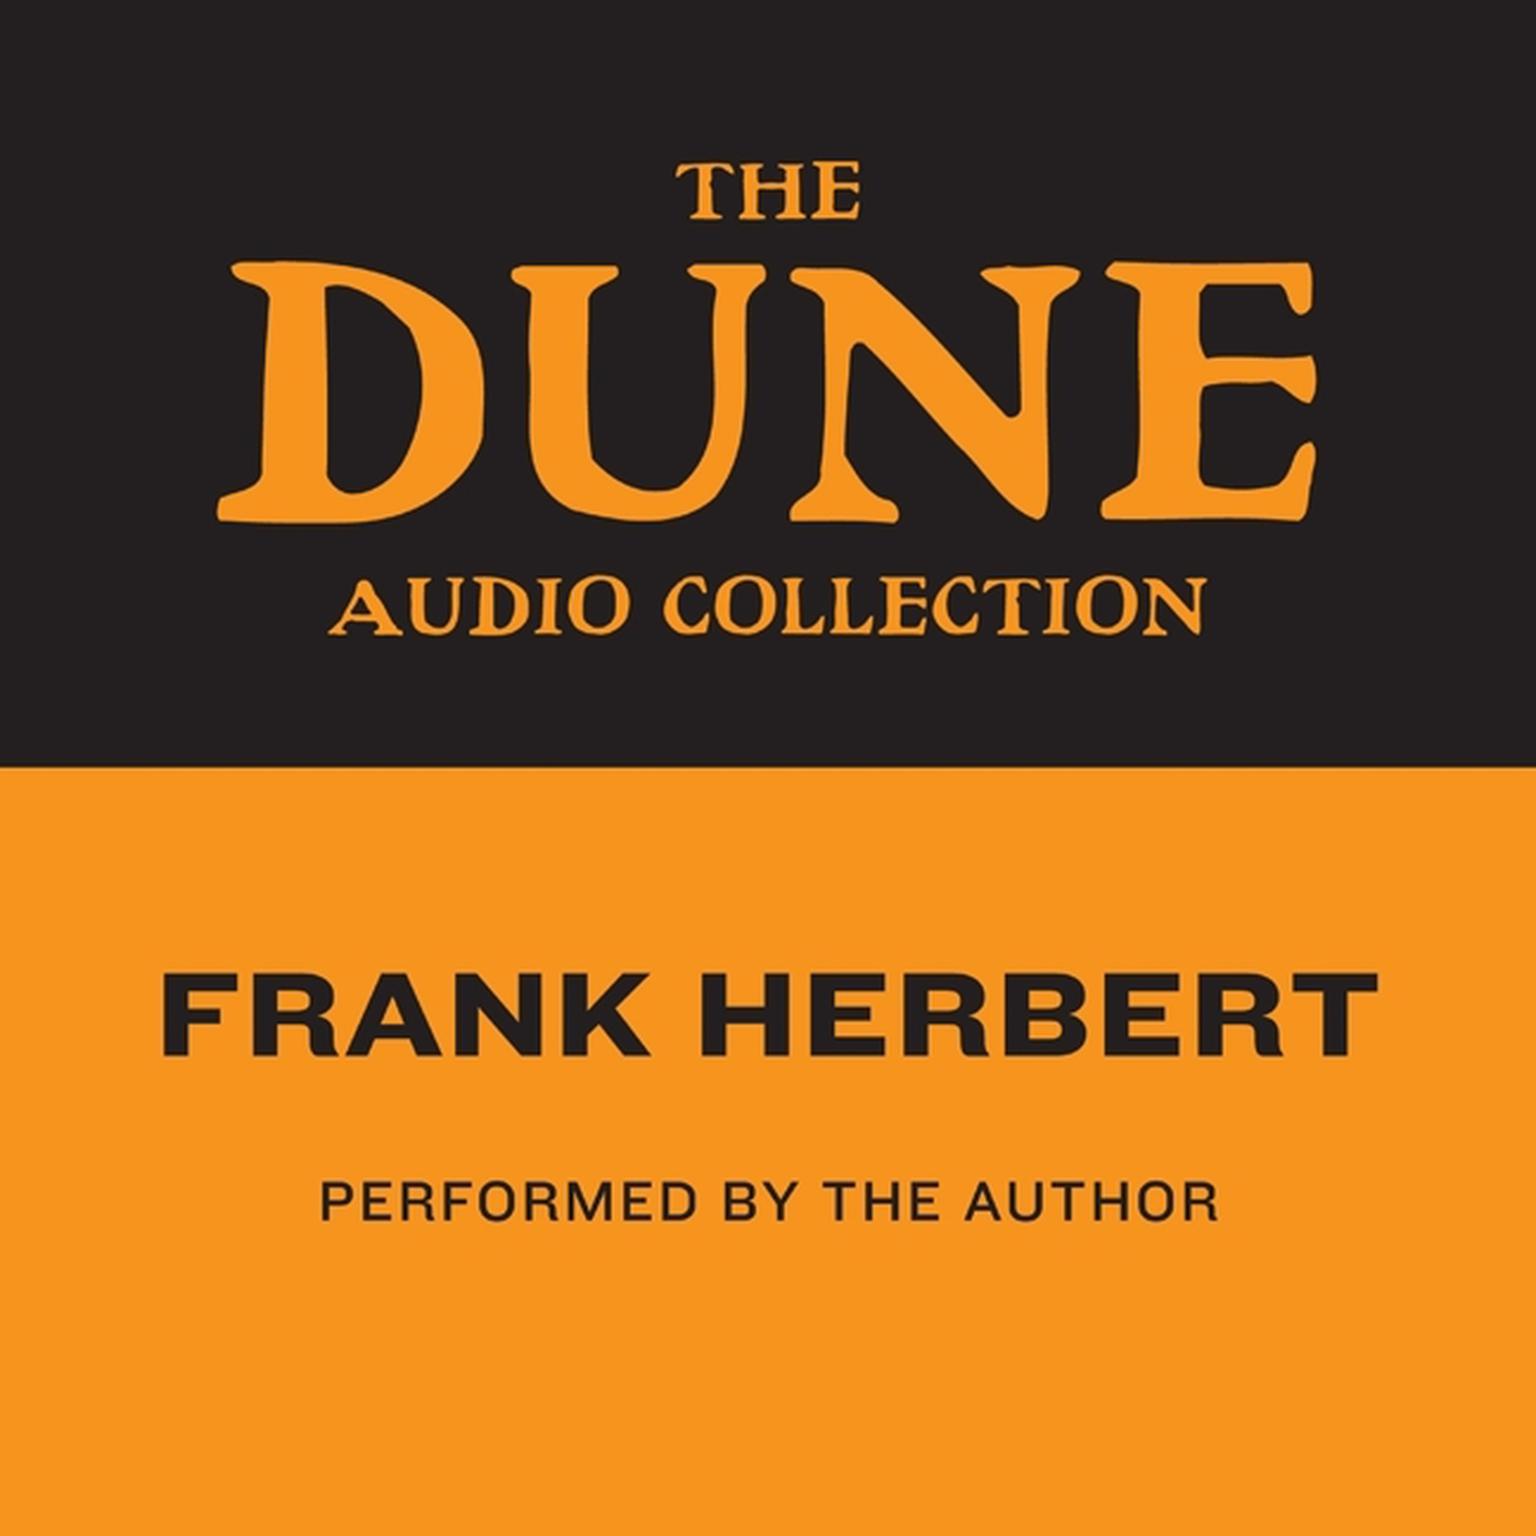 The Dune Audio Collection (Abridged) Audiobook, by Frank Herbert